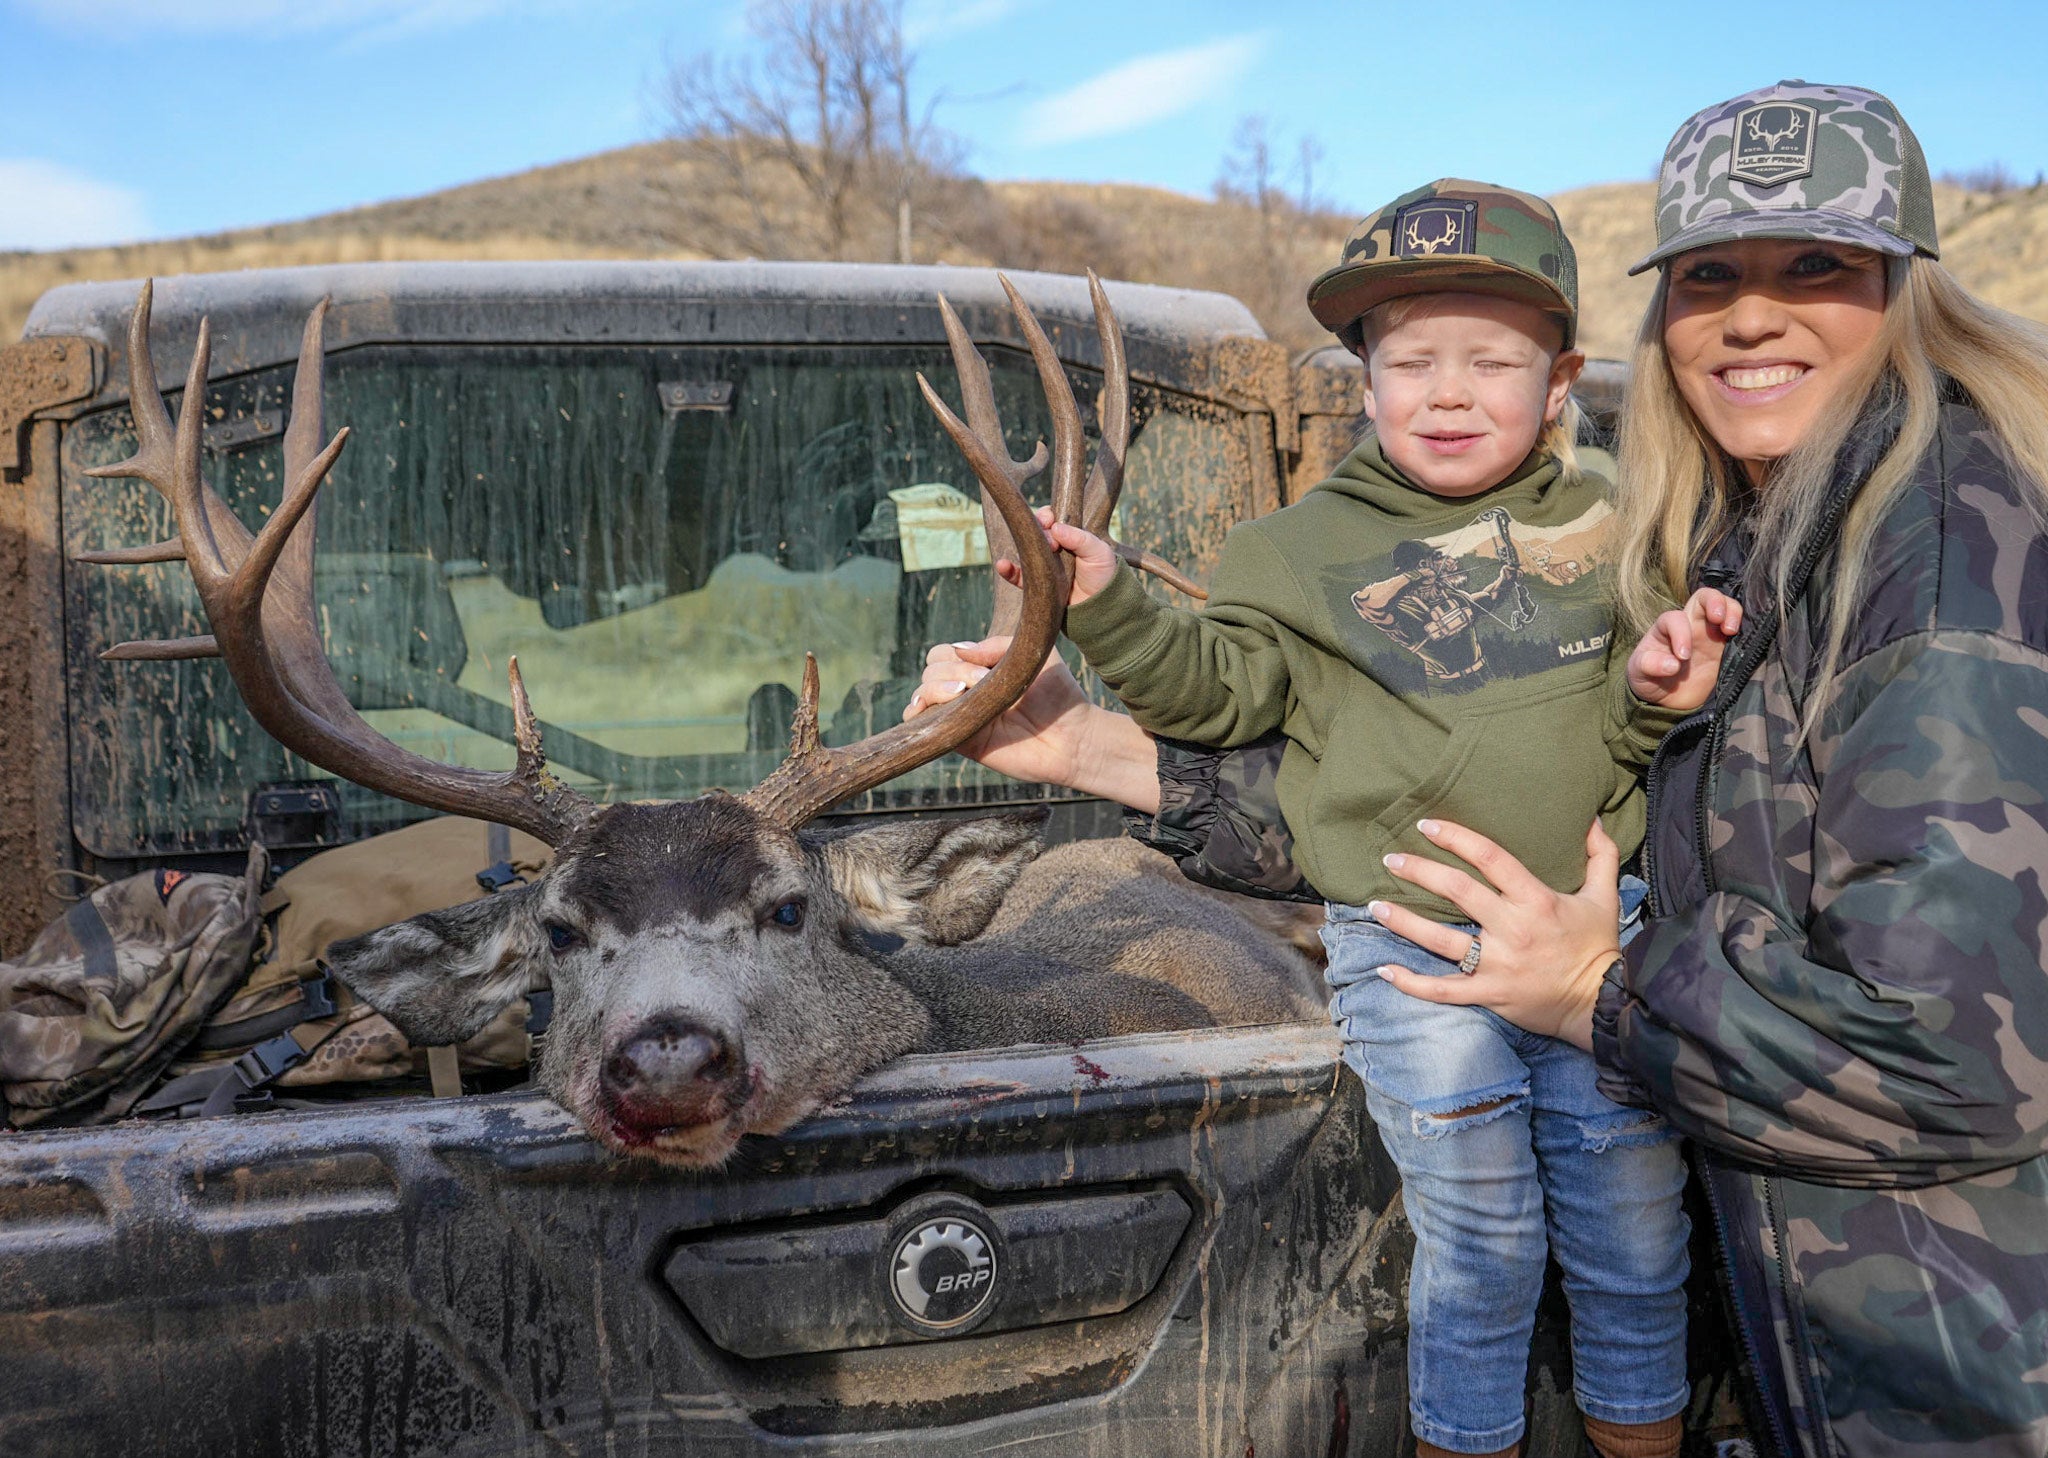 Muley Freak Mother's Day Sale! Explore Top Deals on Women's & Kids' Outdoor Gear. Don’t Miss Out!